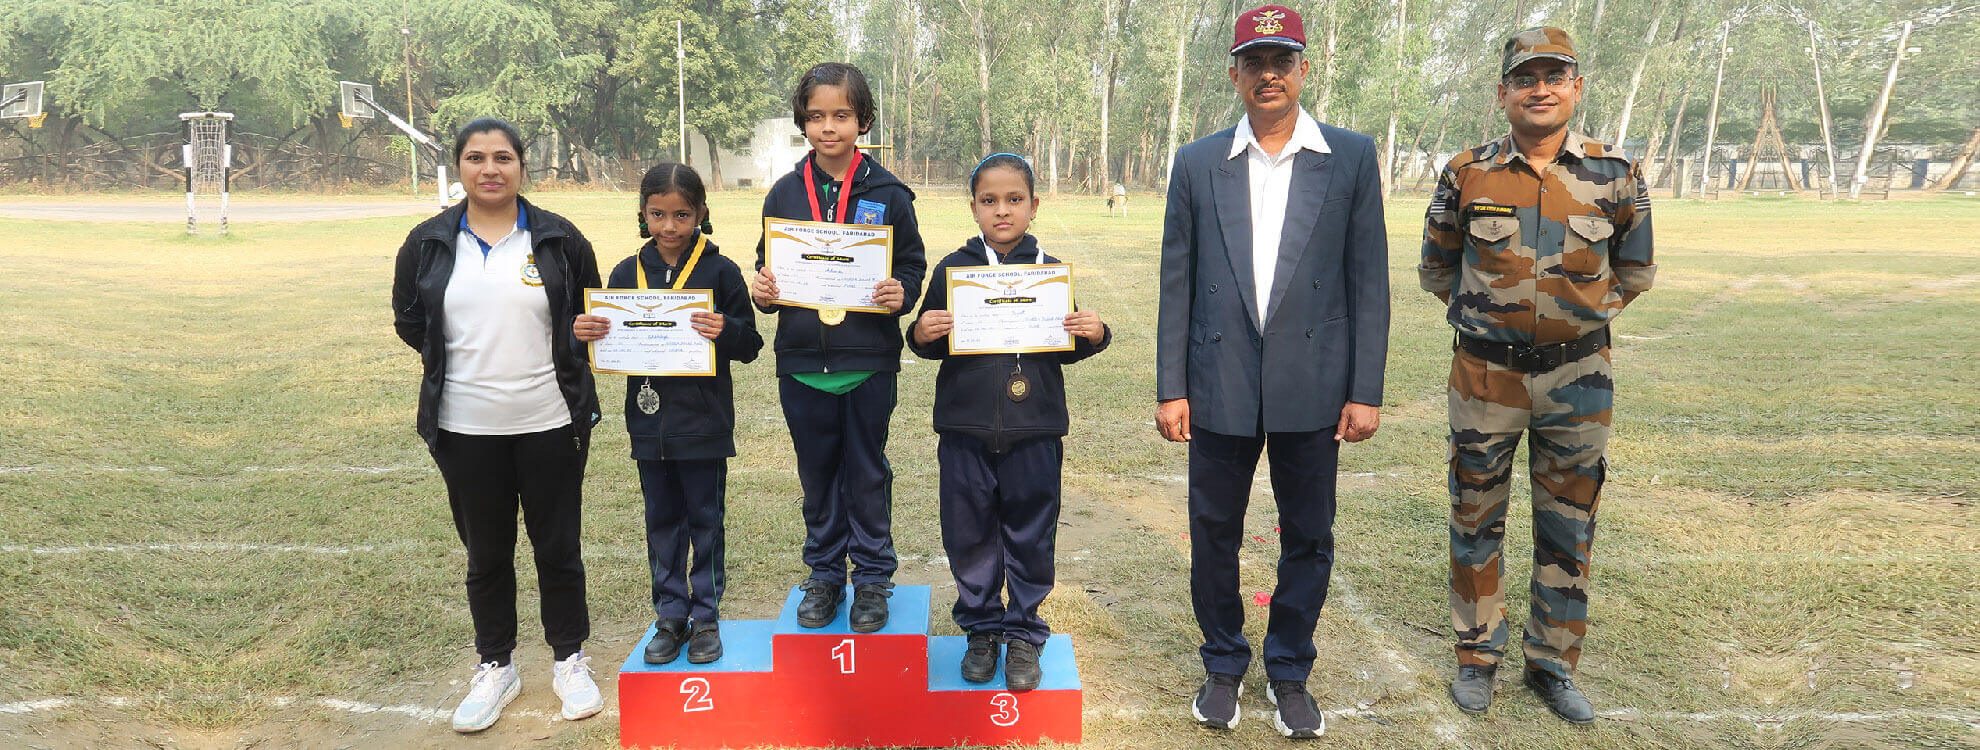 PRIZE DISTRIBUTION OF ANNUAL SPORTS MEET